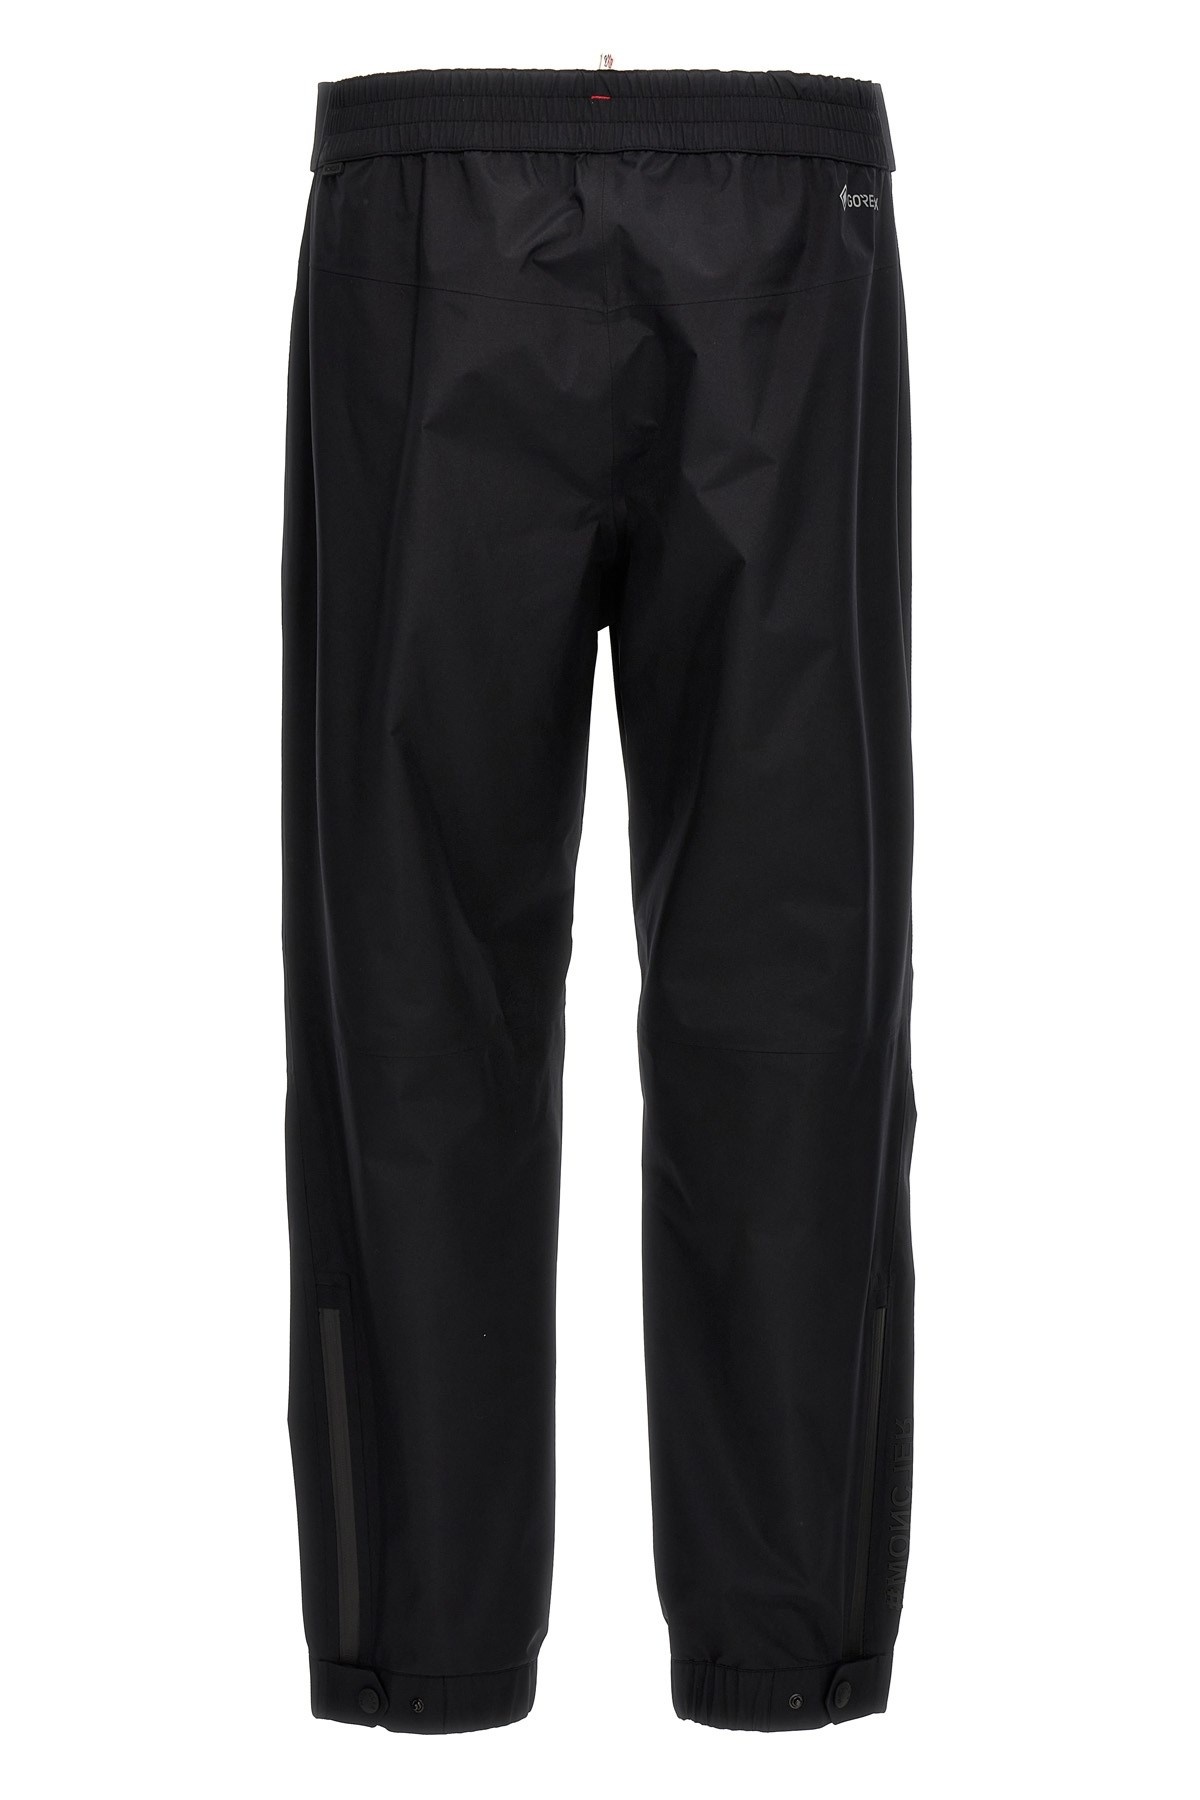 GORE-TEX trousers - 2